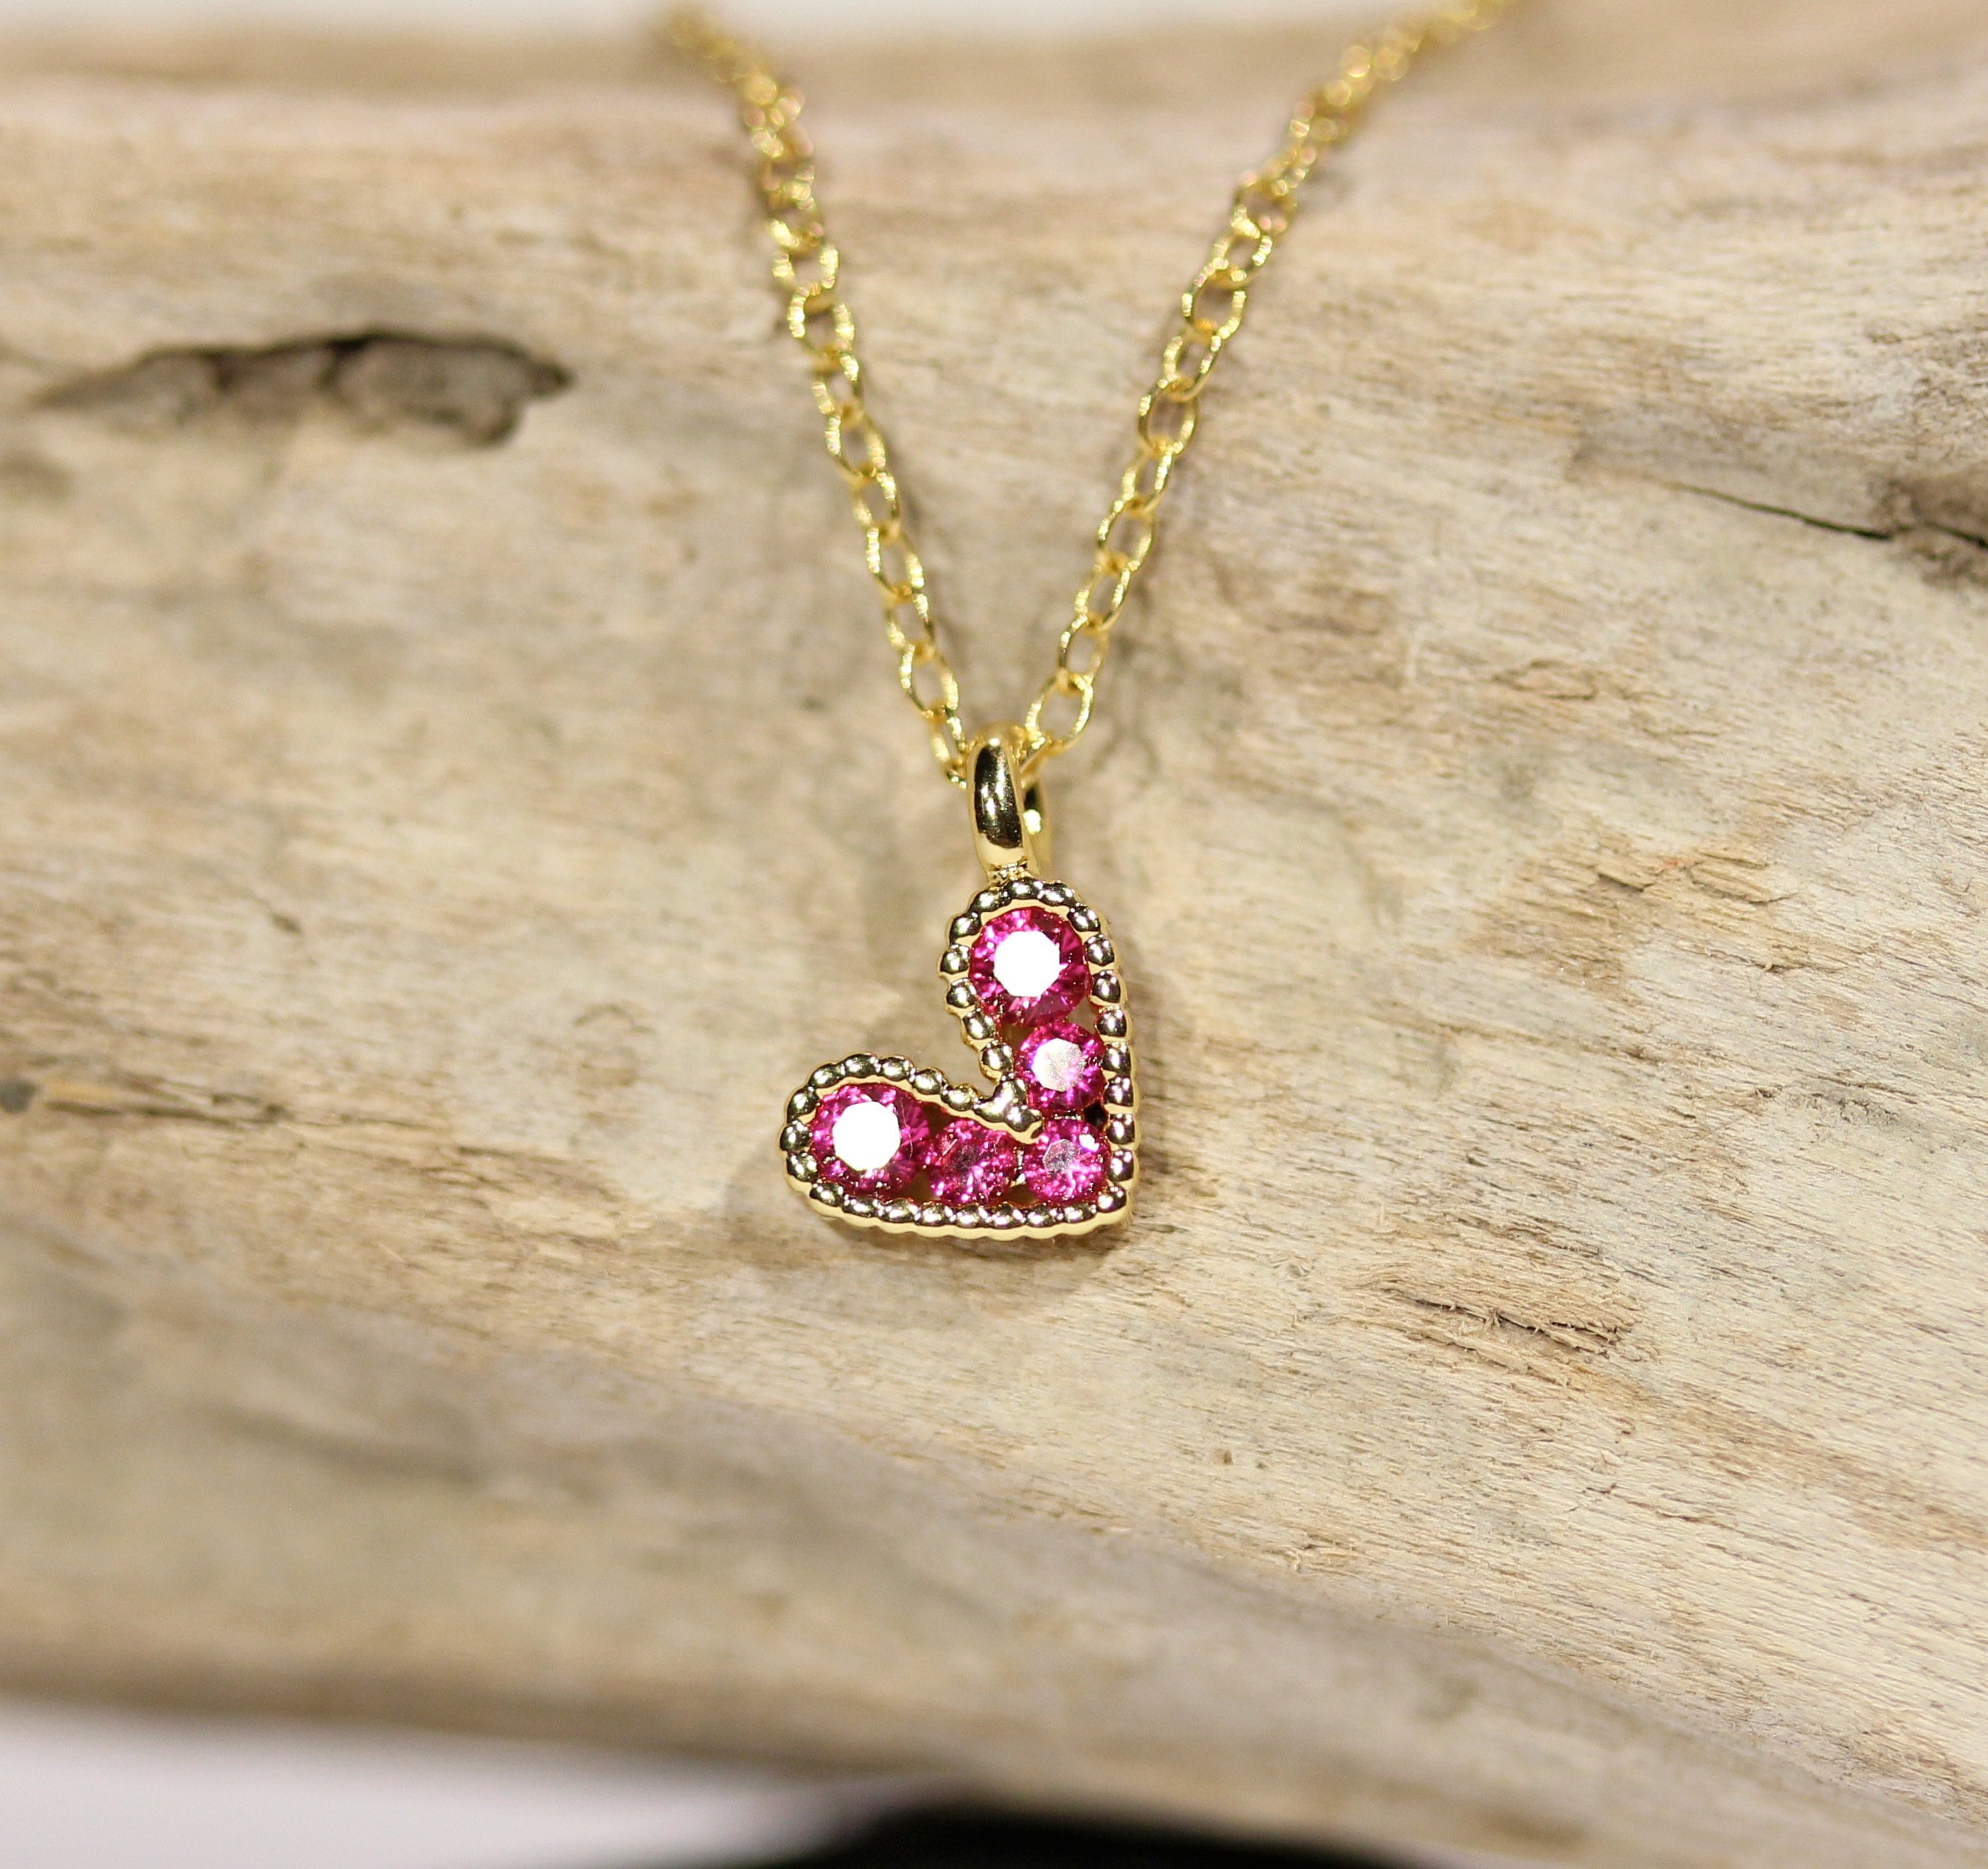 Tiny heart necklace - pink heart necklace - gold heart necklace - love ...